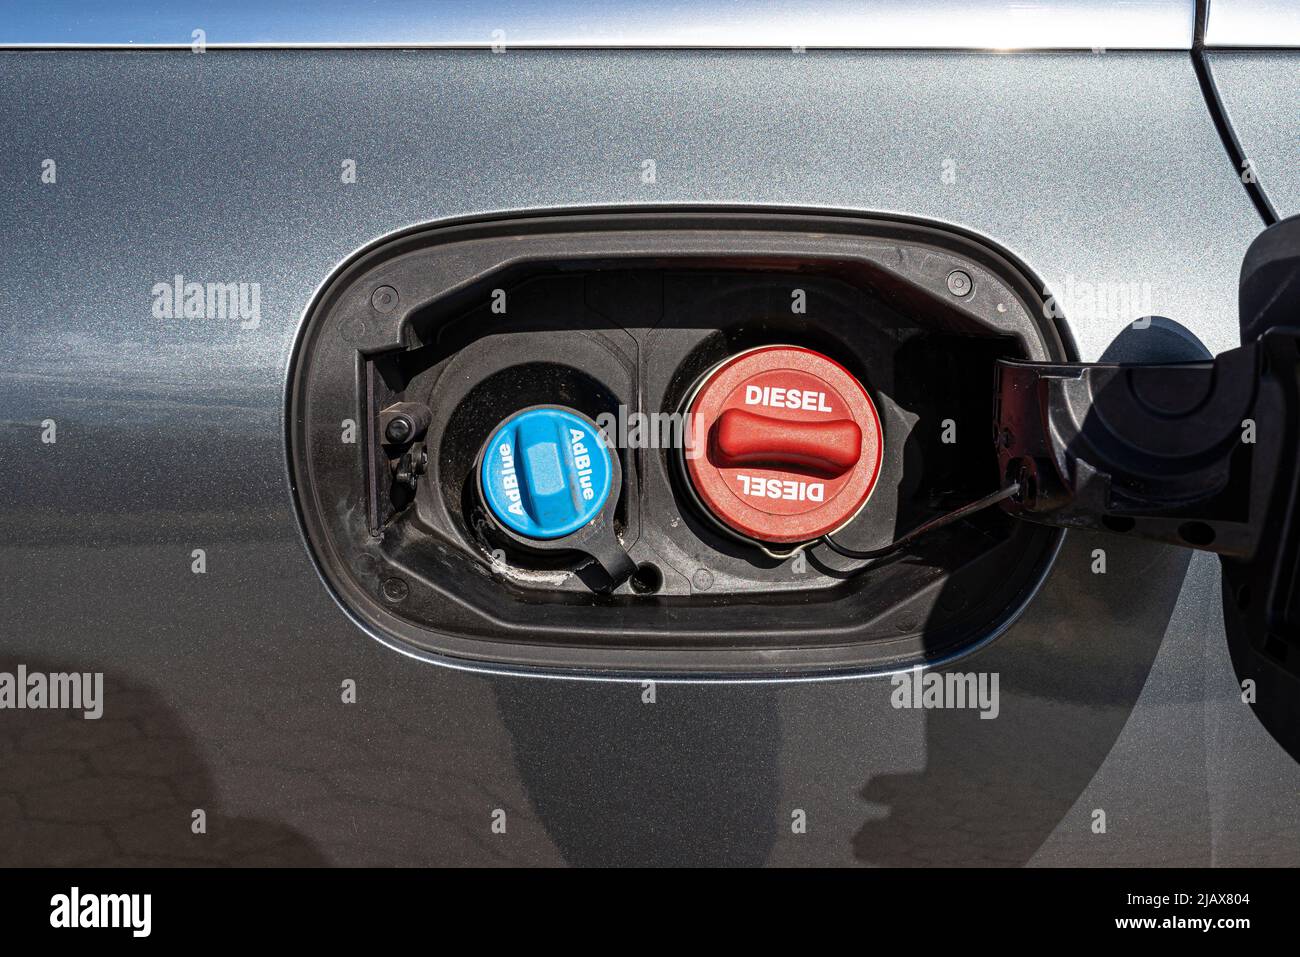 Fuel filler flap open with red diesel cap and blue adblue, the fuel filler caps are closed. Stock Photo